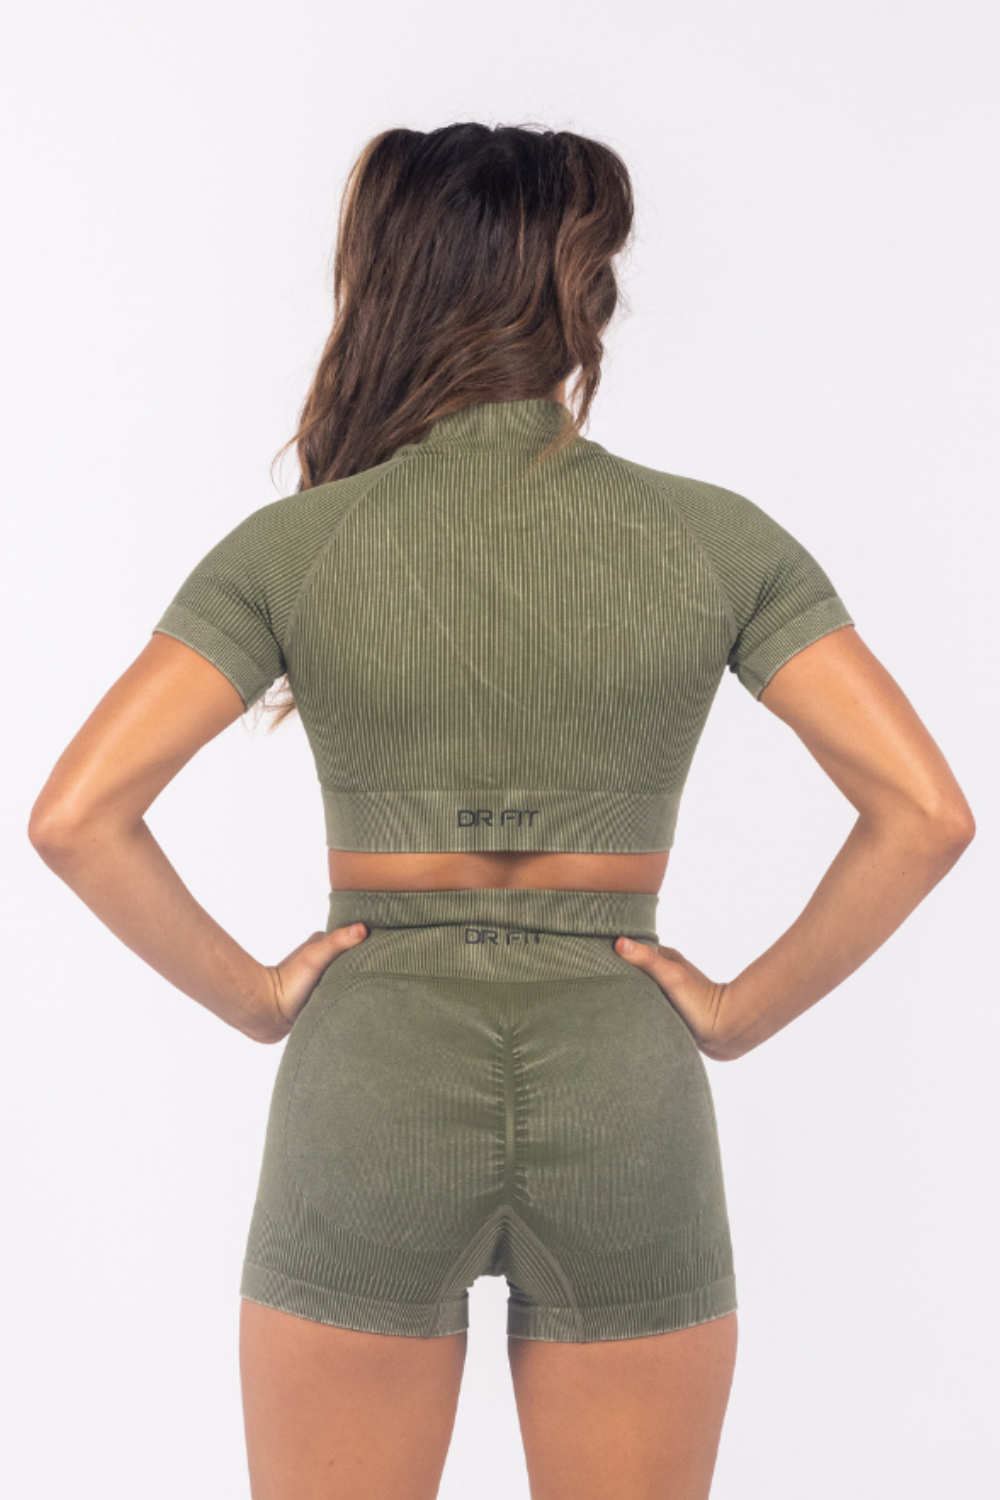 Turtle Neck Army Green Short Sleeved Top